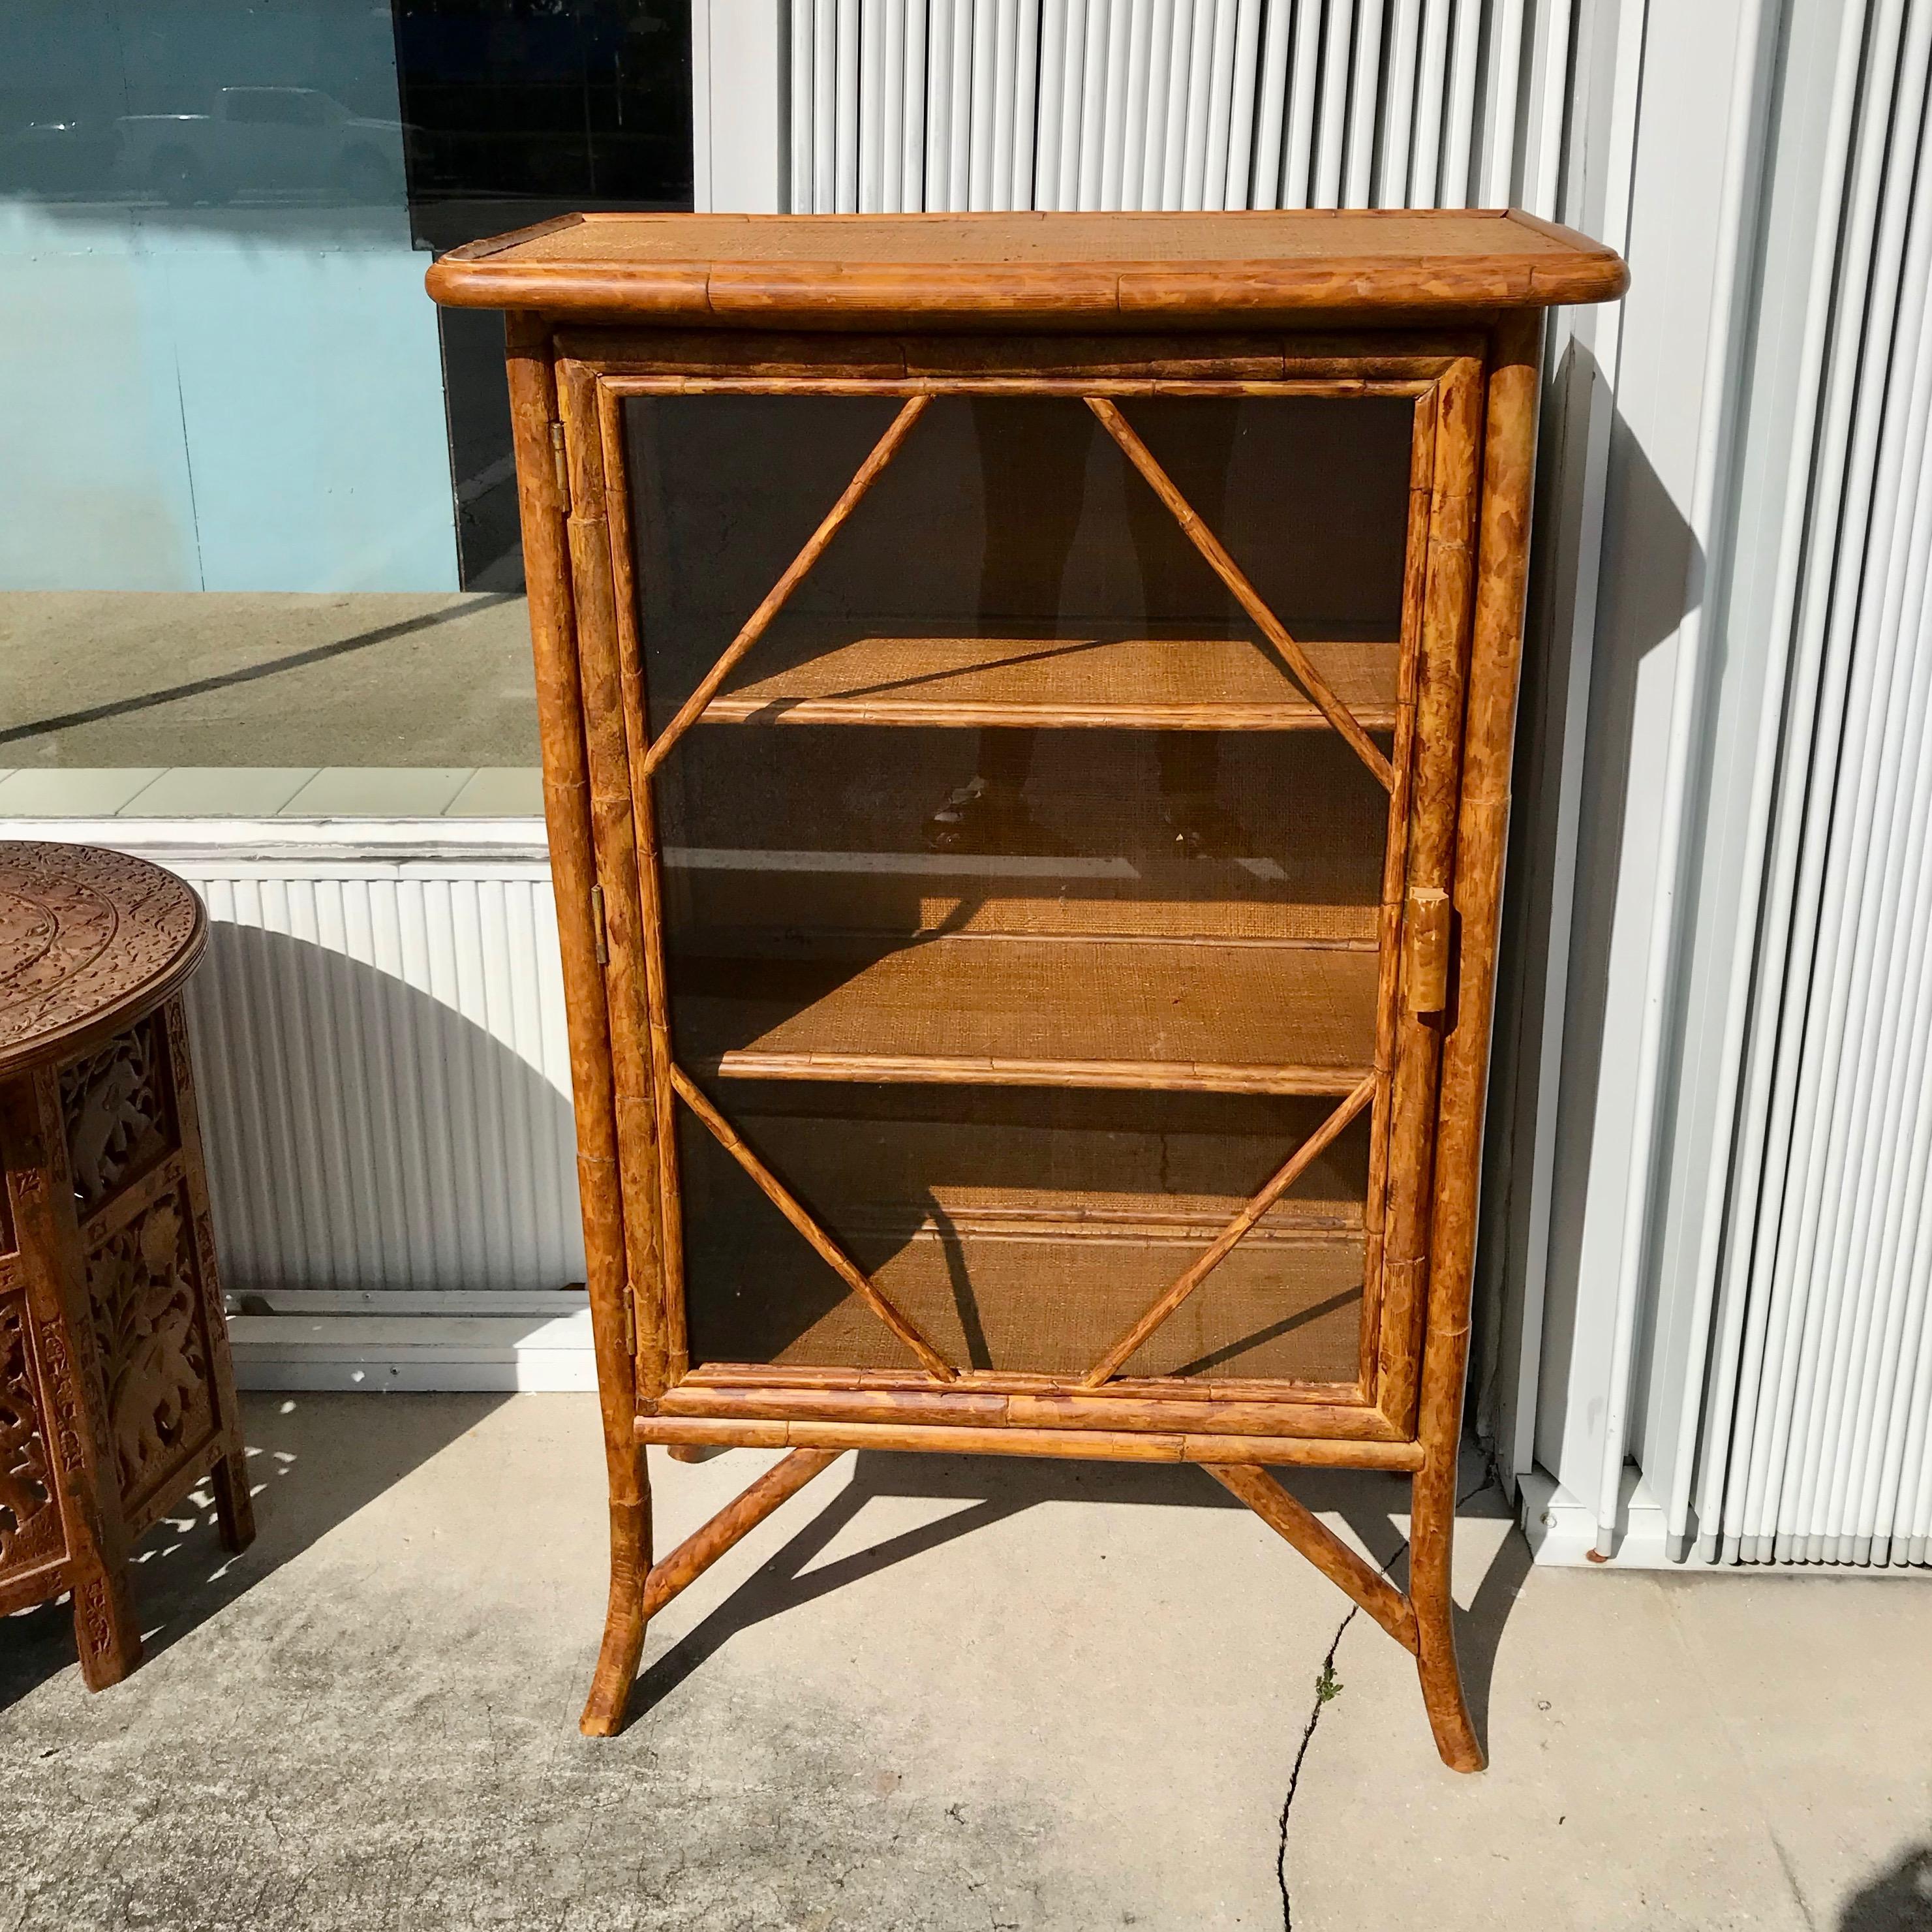 Attractively fashioned with rattan facing on grasscloth covered shelves.
Nicely accented front door. The top and side panels are also covered
with grasscloth.
Nicely proportioned vintage piece.